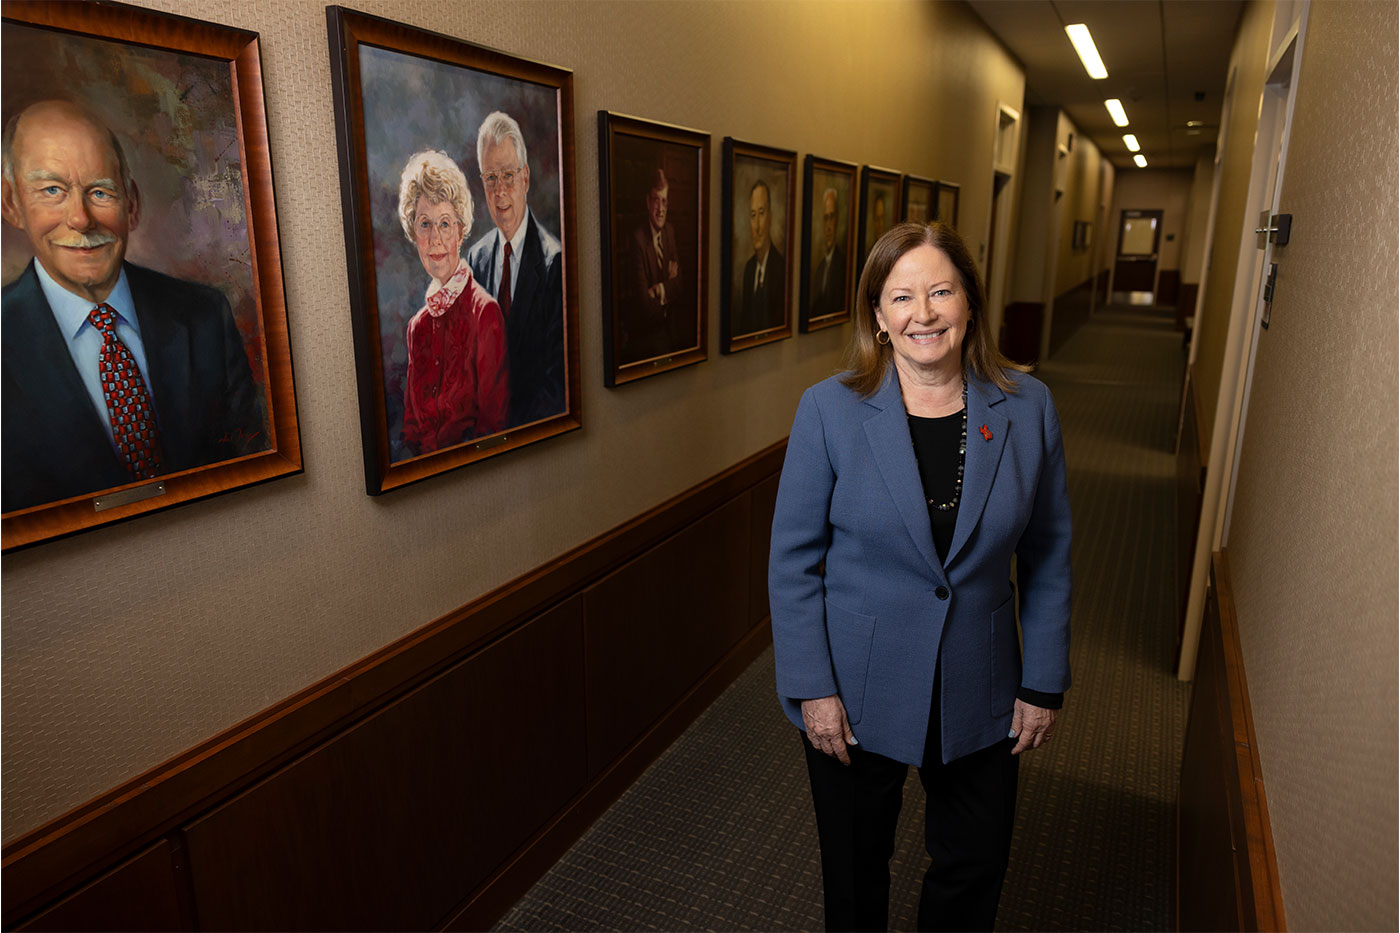 Margaret standing in a hallway lined with portraits. 